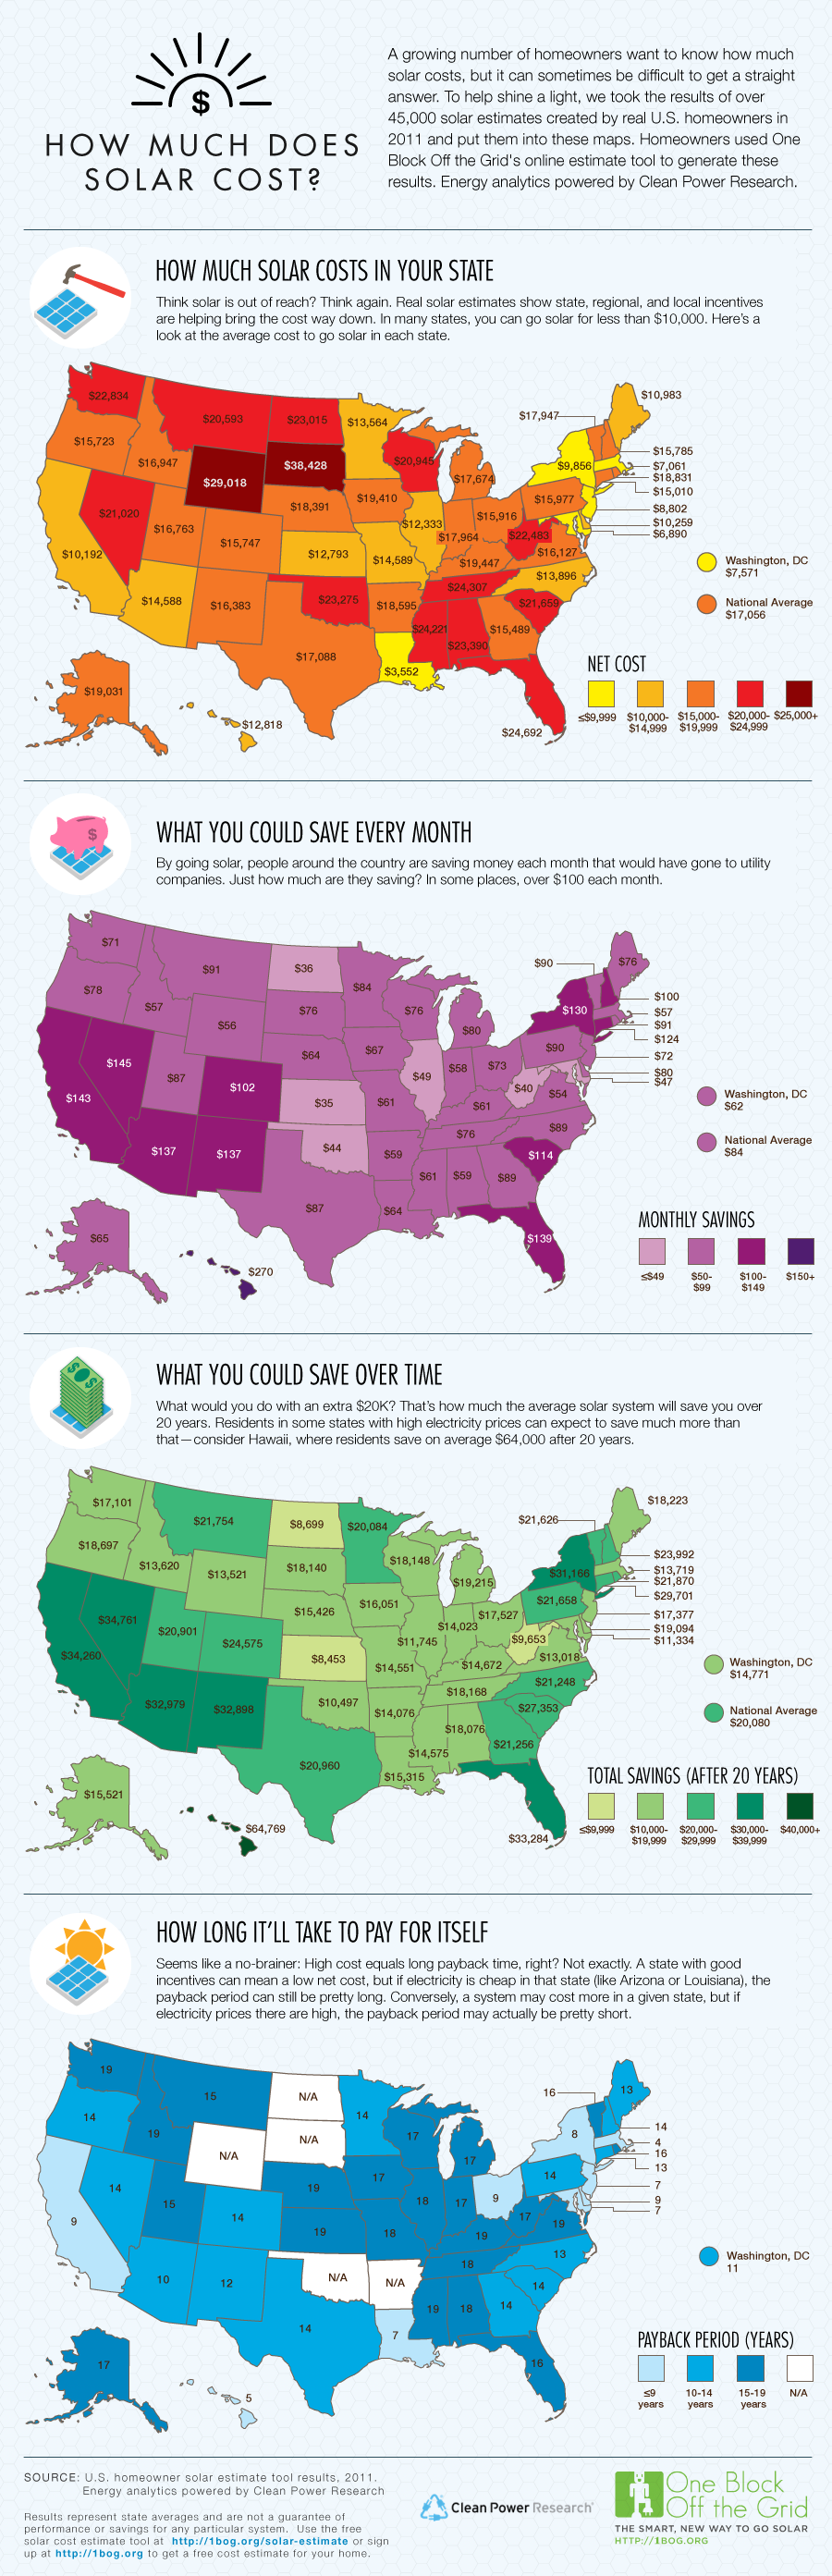 solar energy cost and savings by state